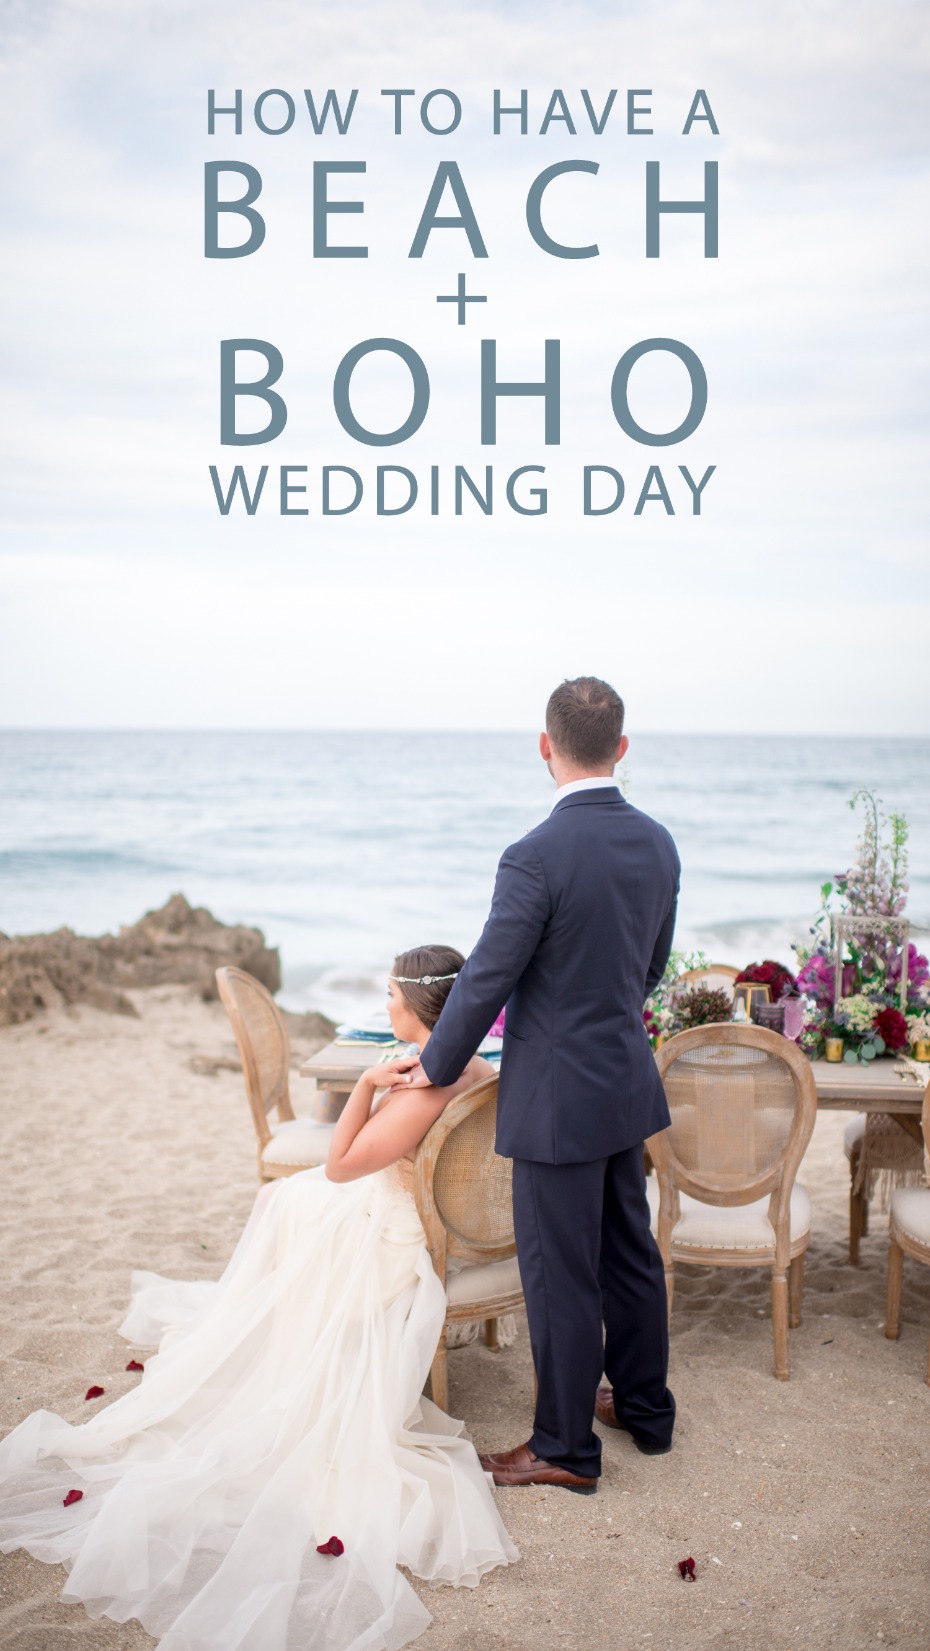 how to have a beach boho wedding day